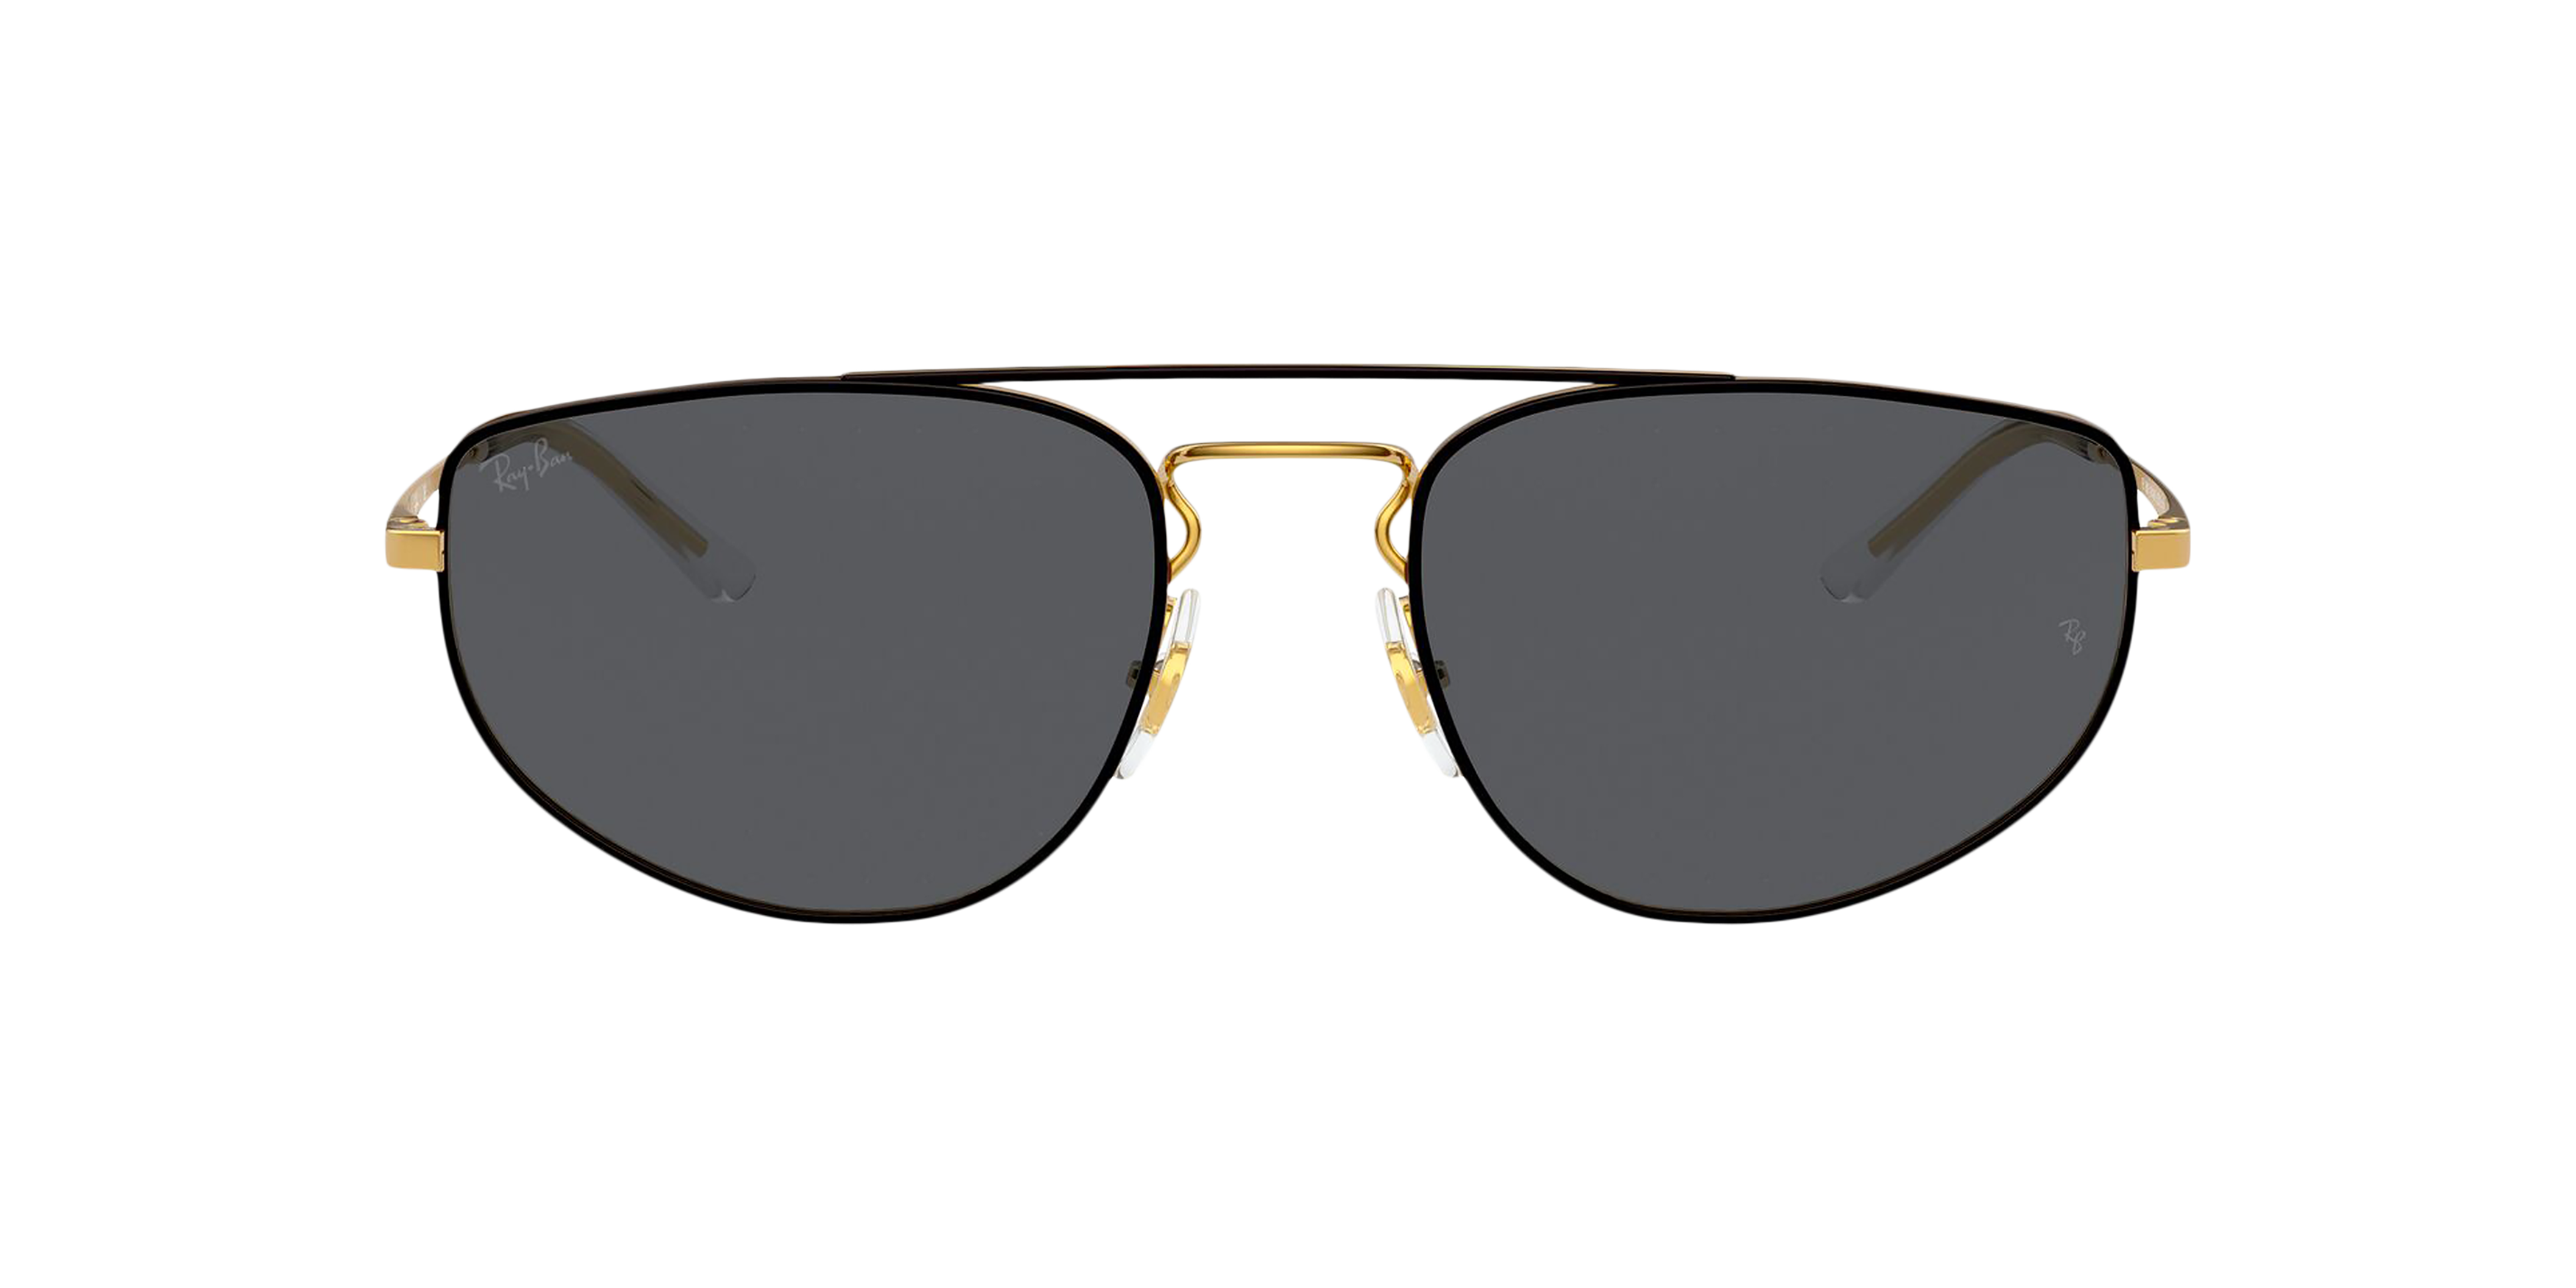 [products.image.front] Ray-Ban RB3668 905487